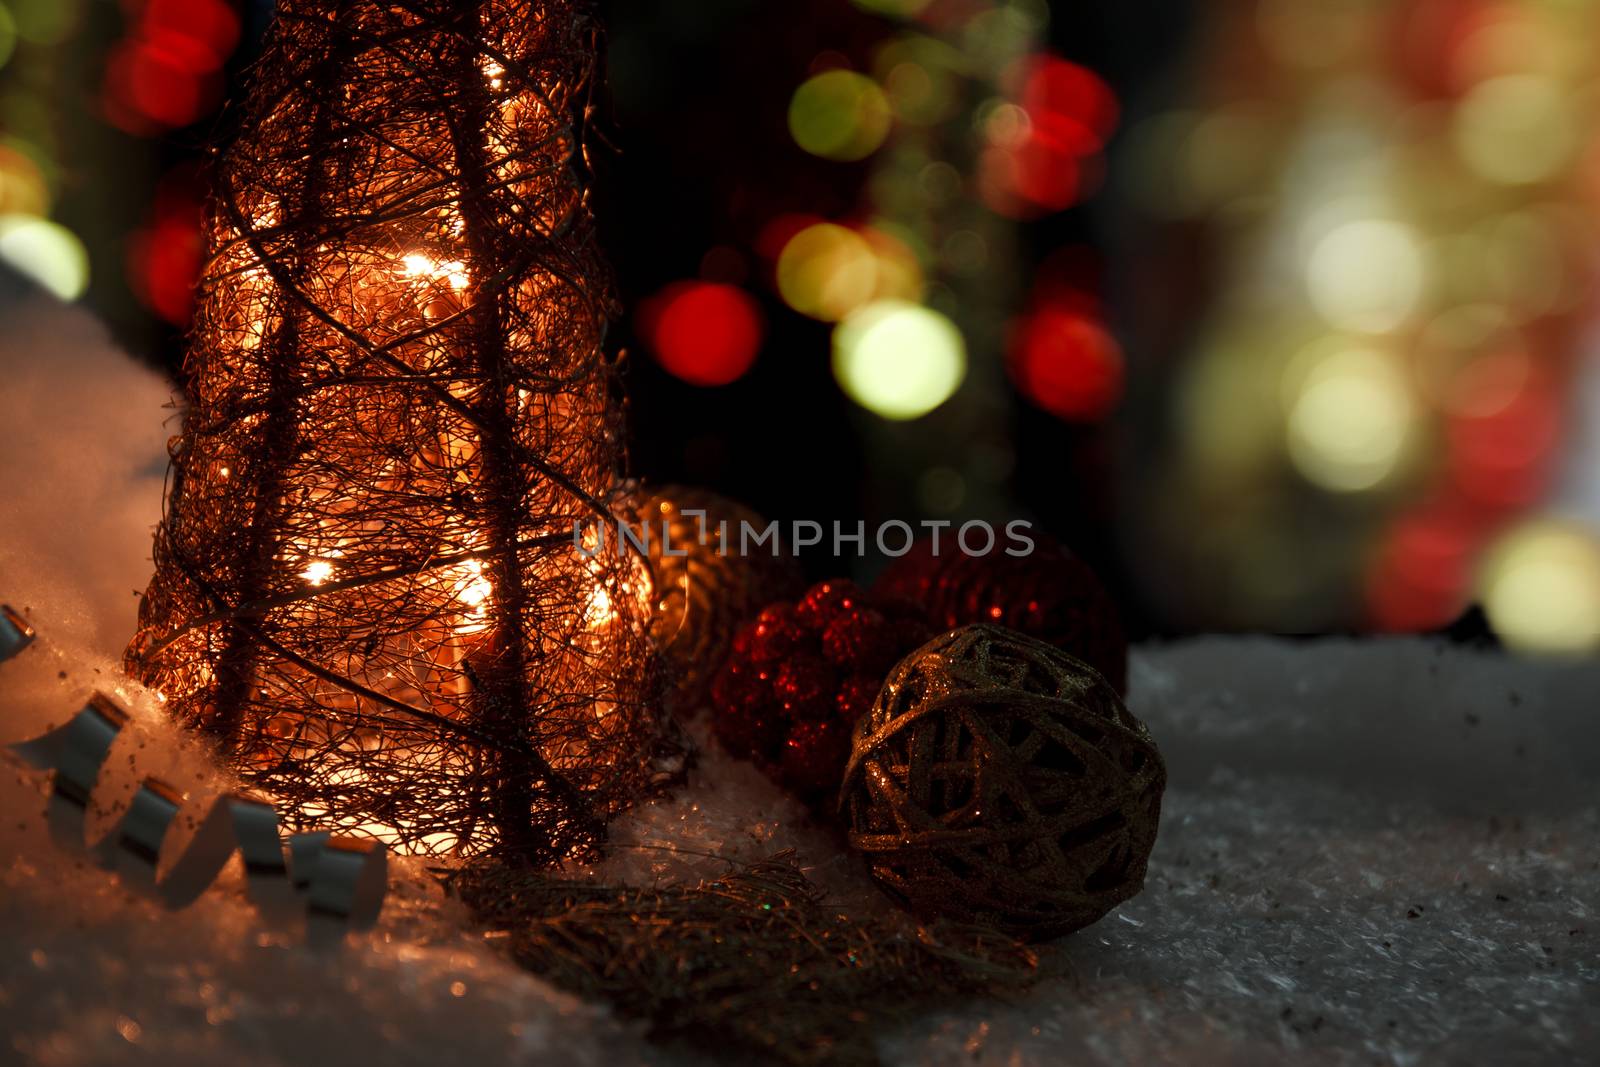 Snow landscape with christmas ornament. Low light